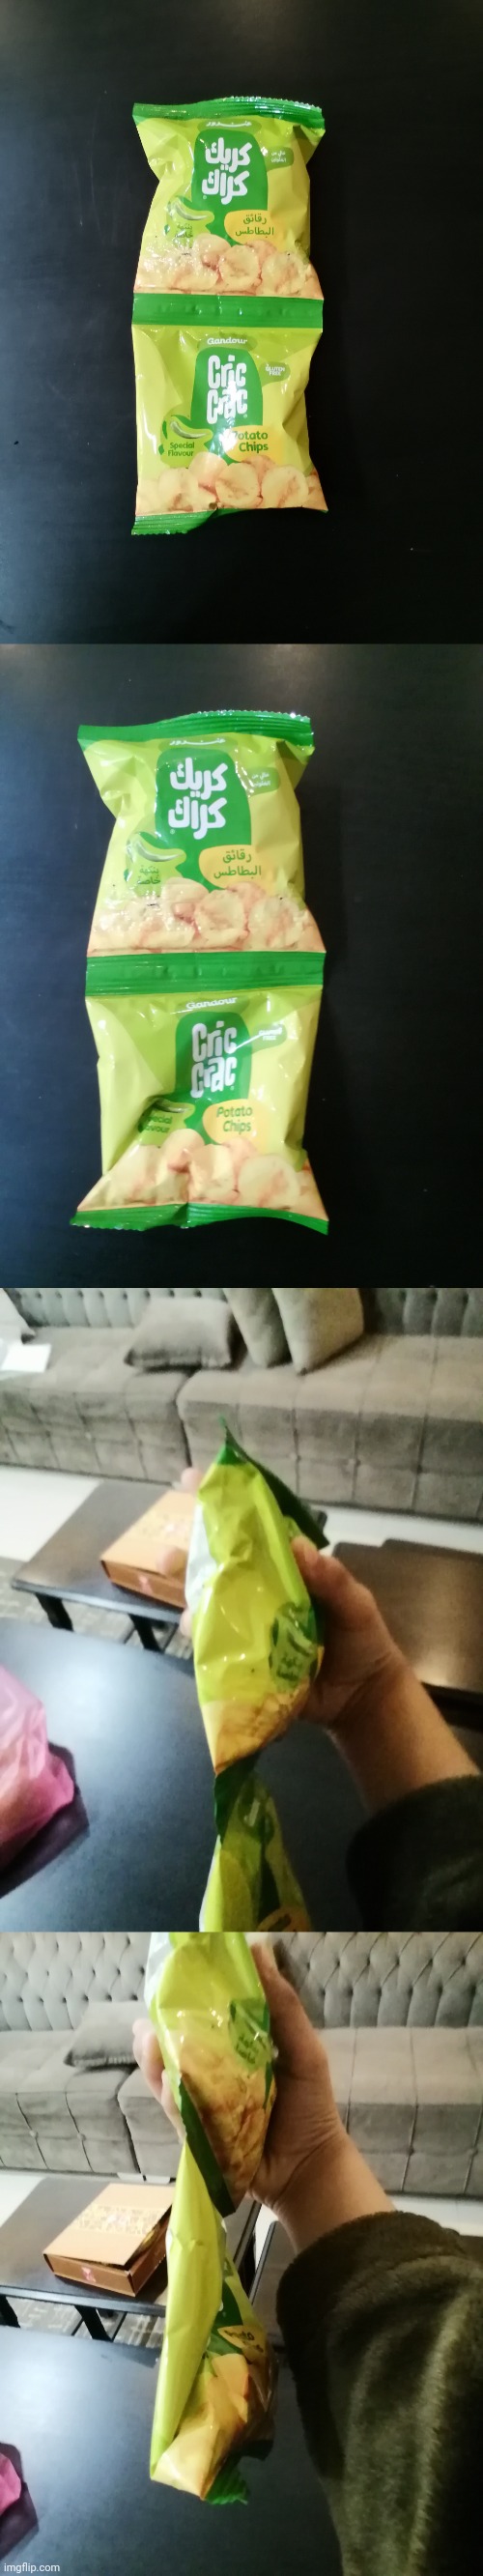 I got 2 chips for 1 chips AND the one up is filled all the way up | image tagged in lucky,jackpot,xd,lol | made w/ Imgflip meme maker